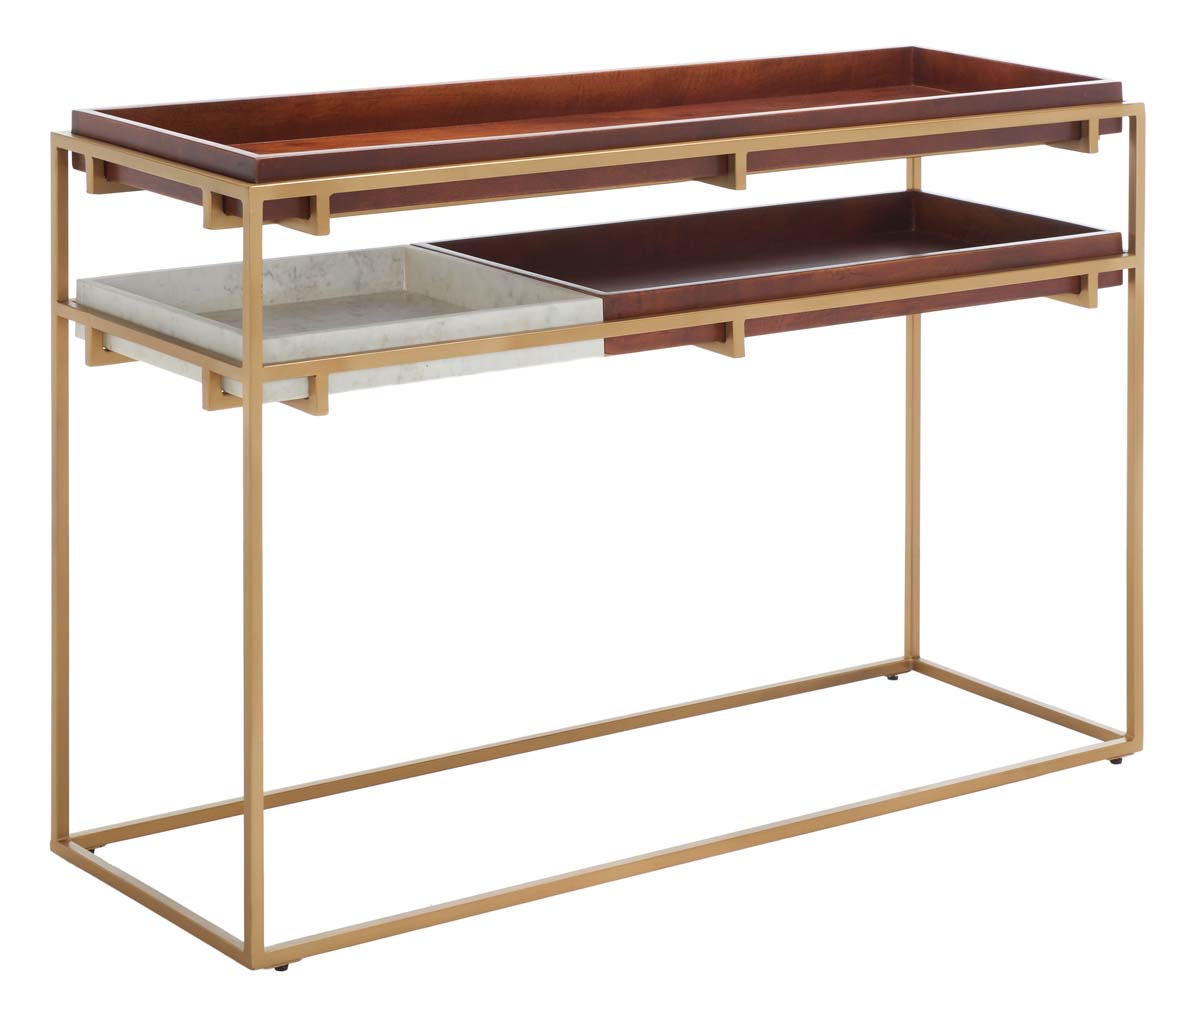 Safavieh Akari Marble Console Table , CNS3700 - Brown/White Marble/Gold